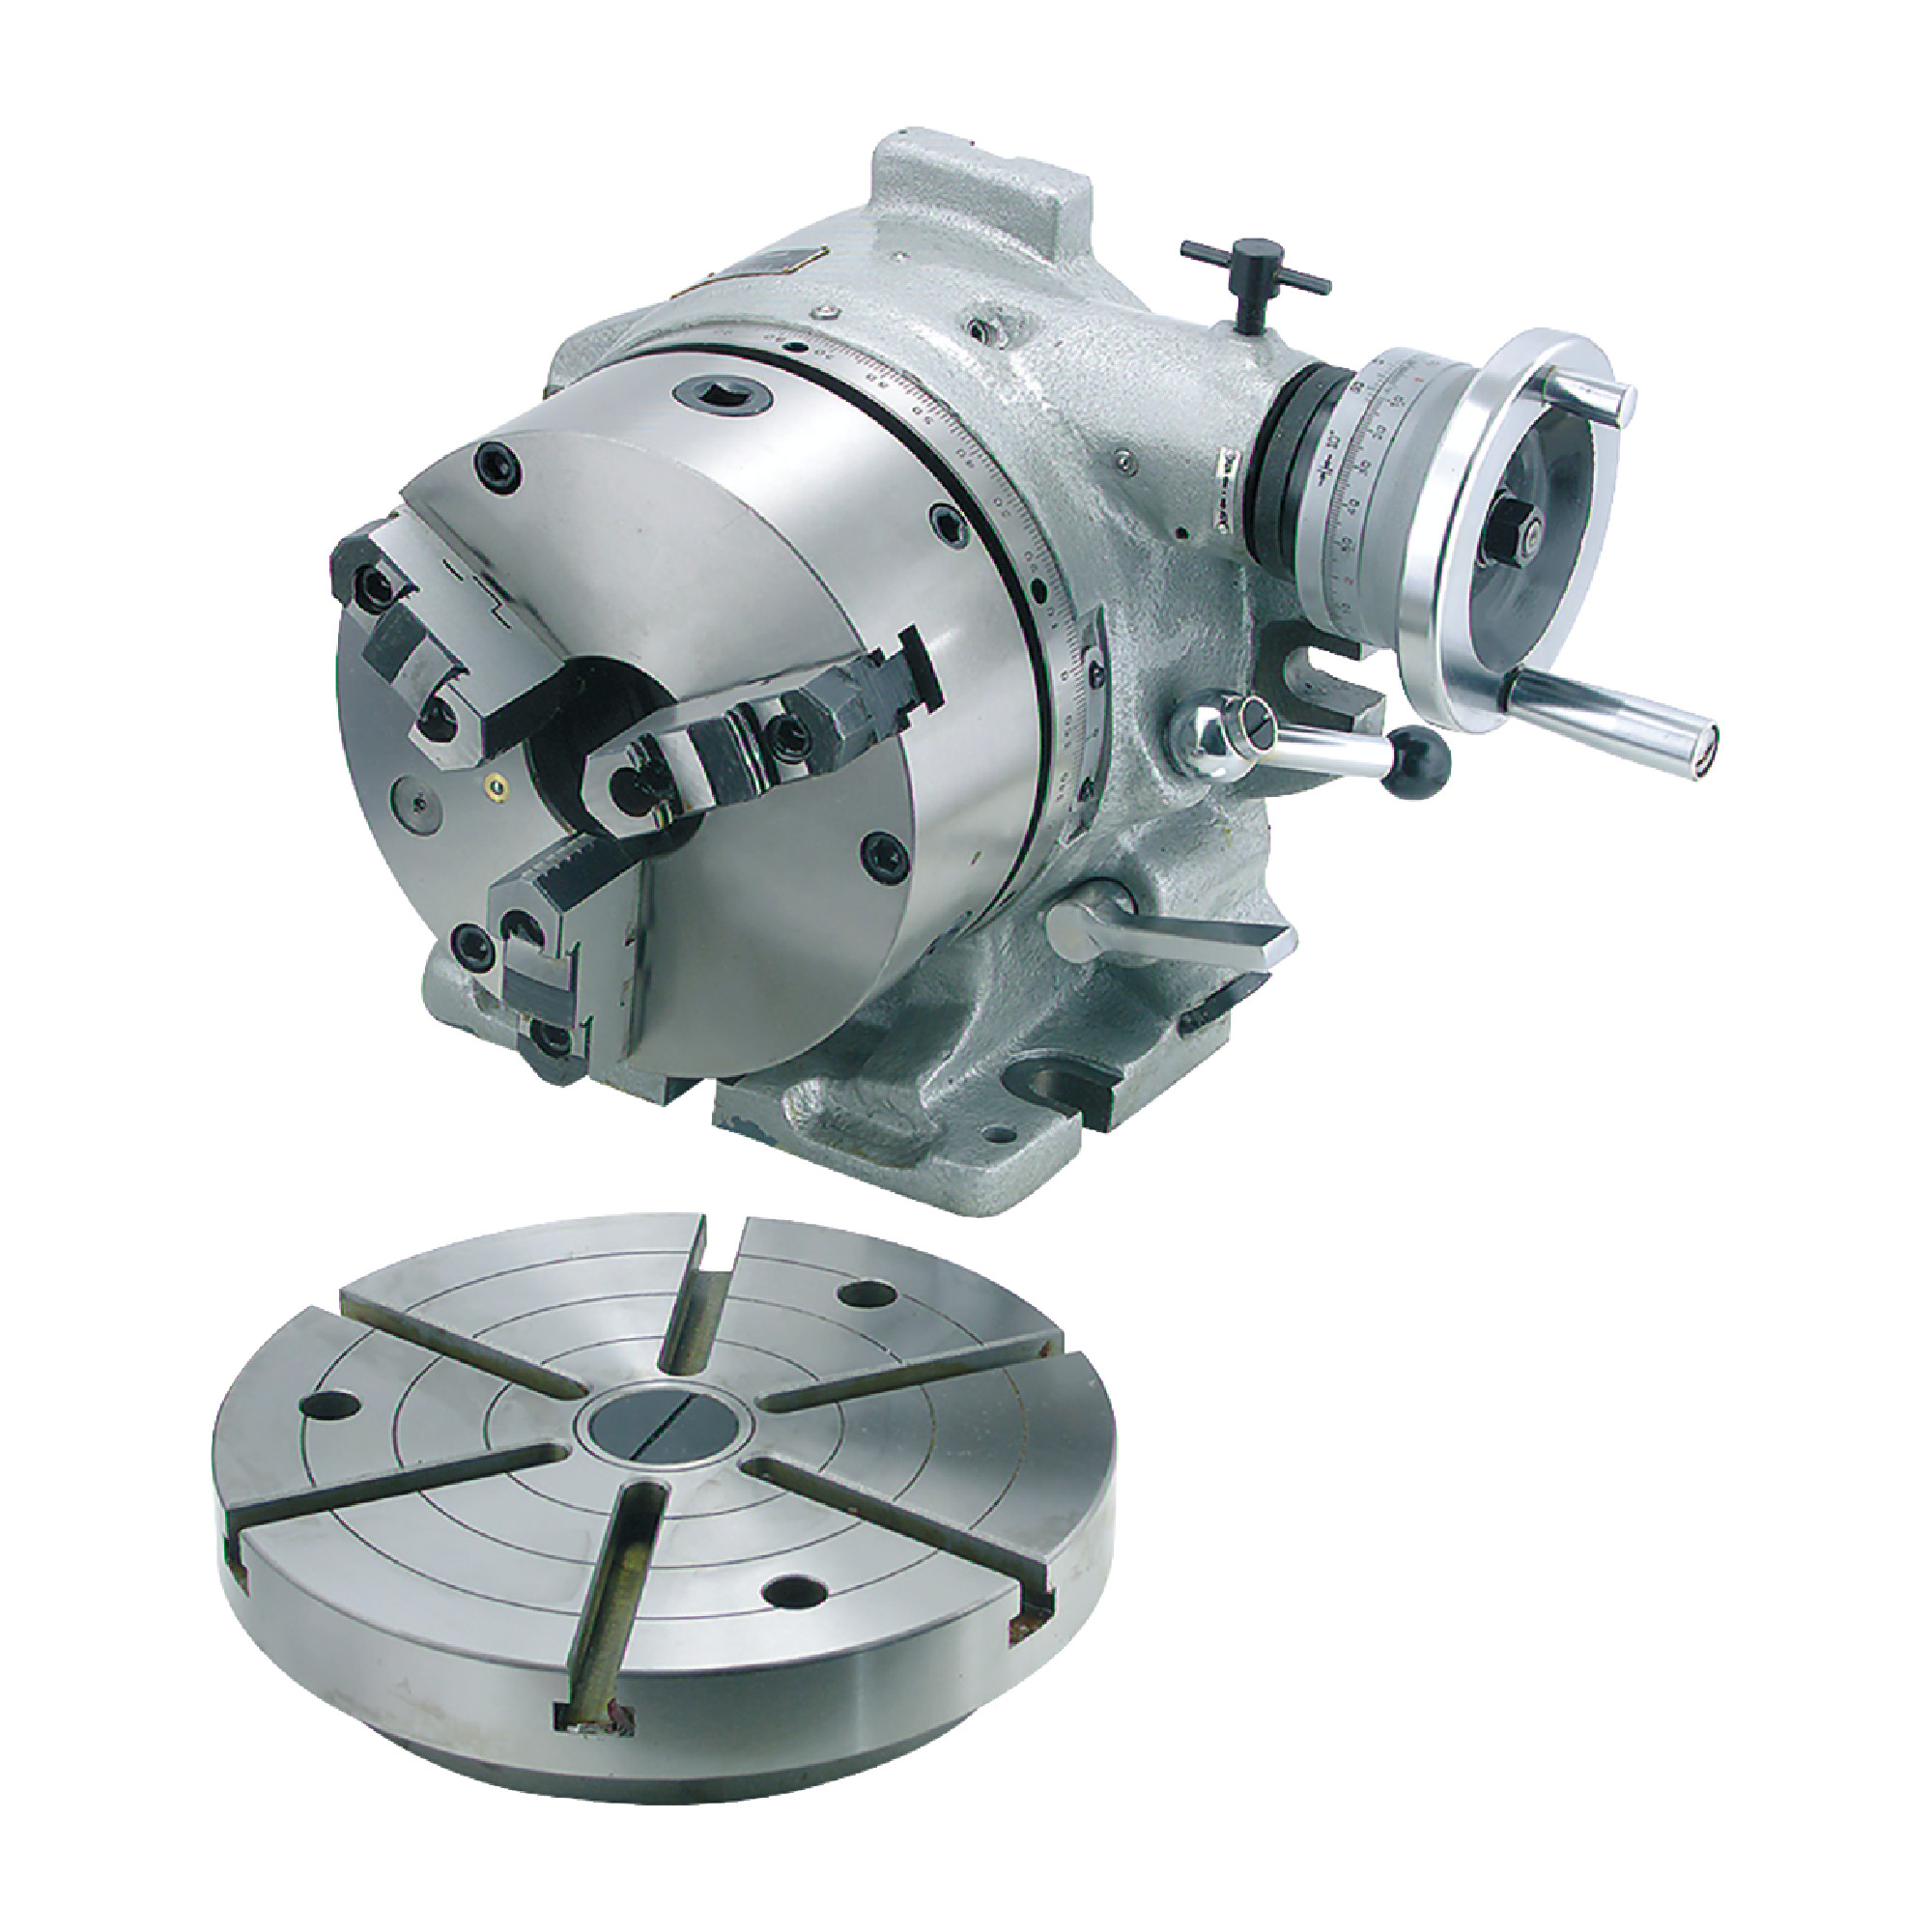 6" Super-Dex Rotary Indexer